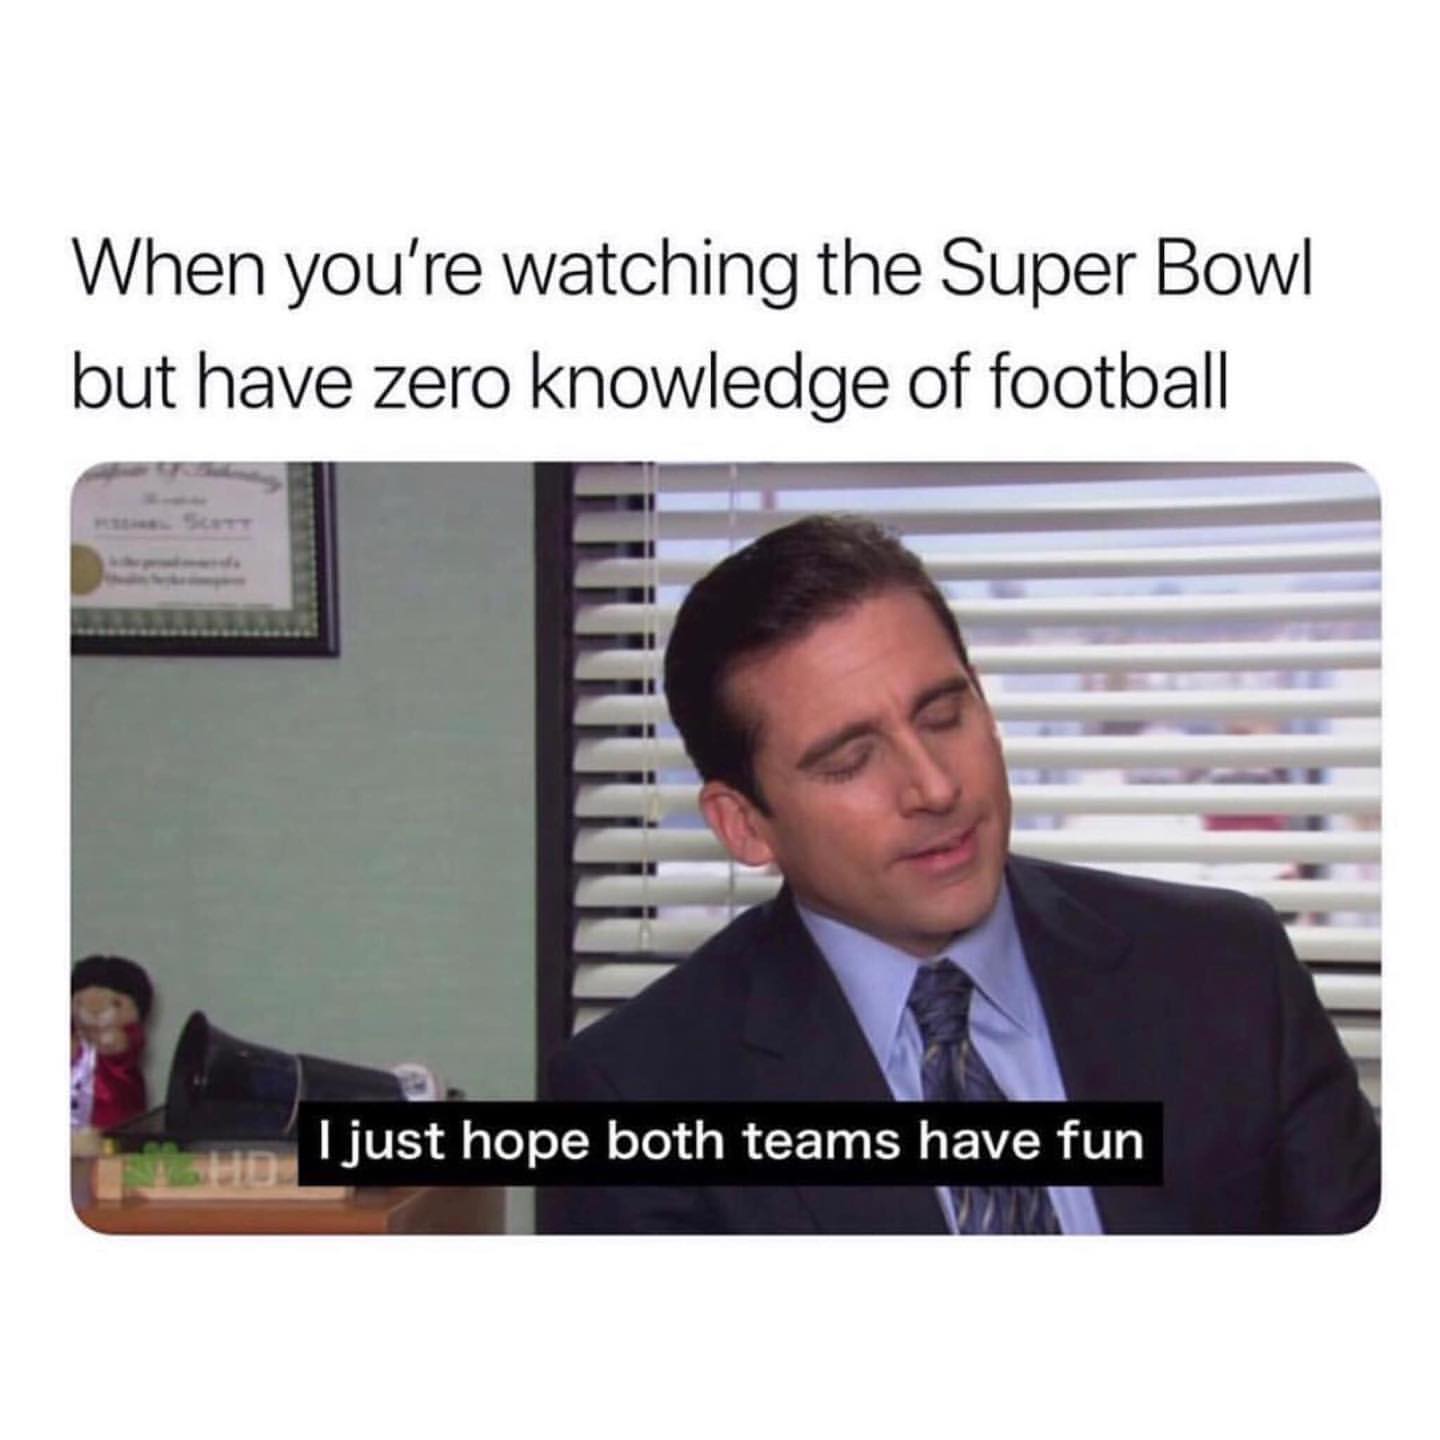 When you're watching the Super Bowl but have zero knowledge of football. I just hope both teams have fun.